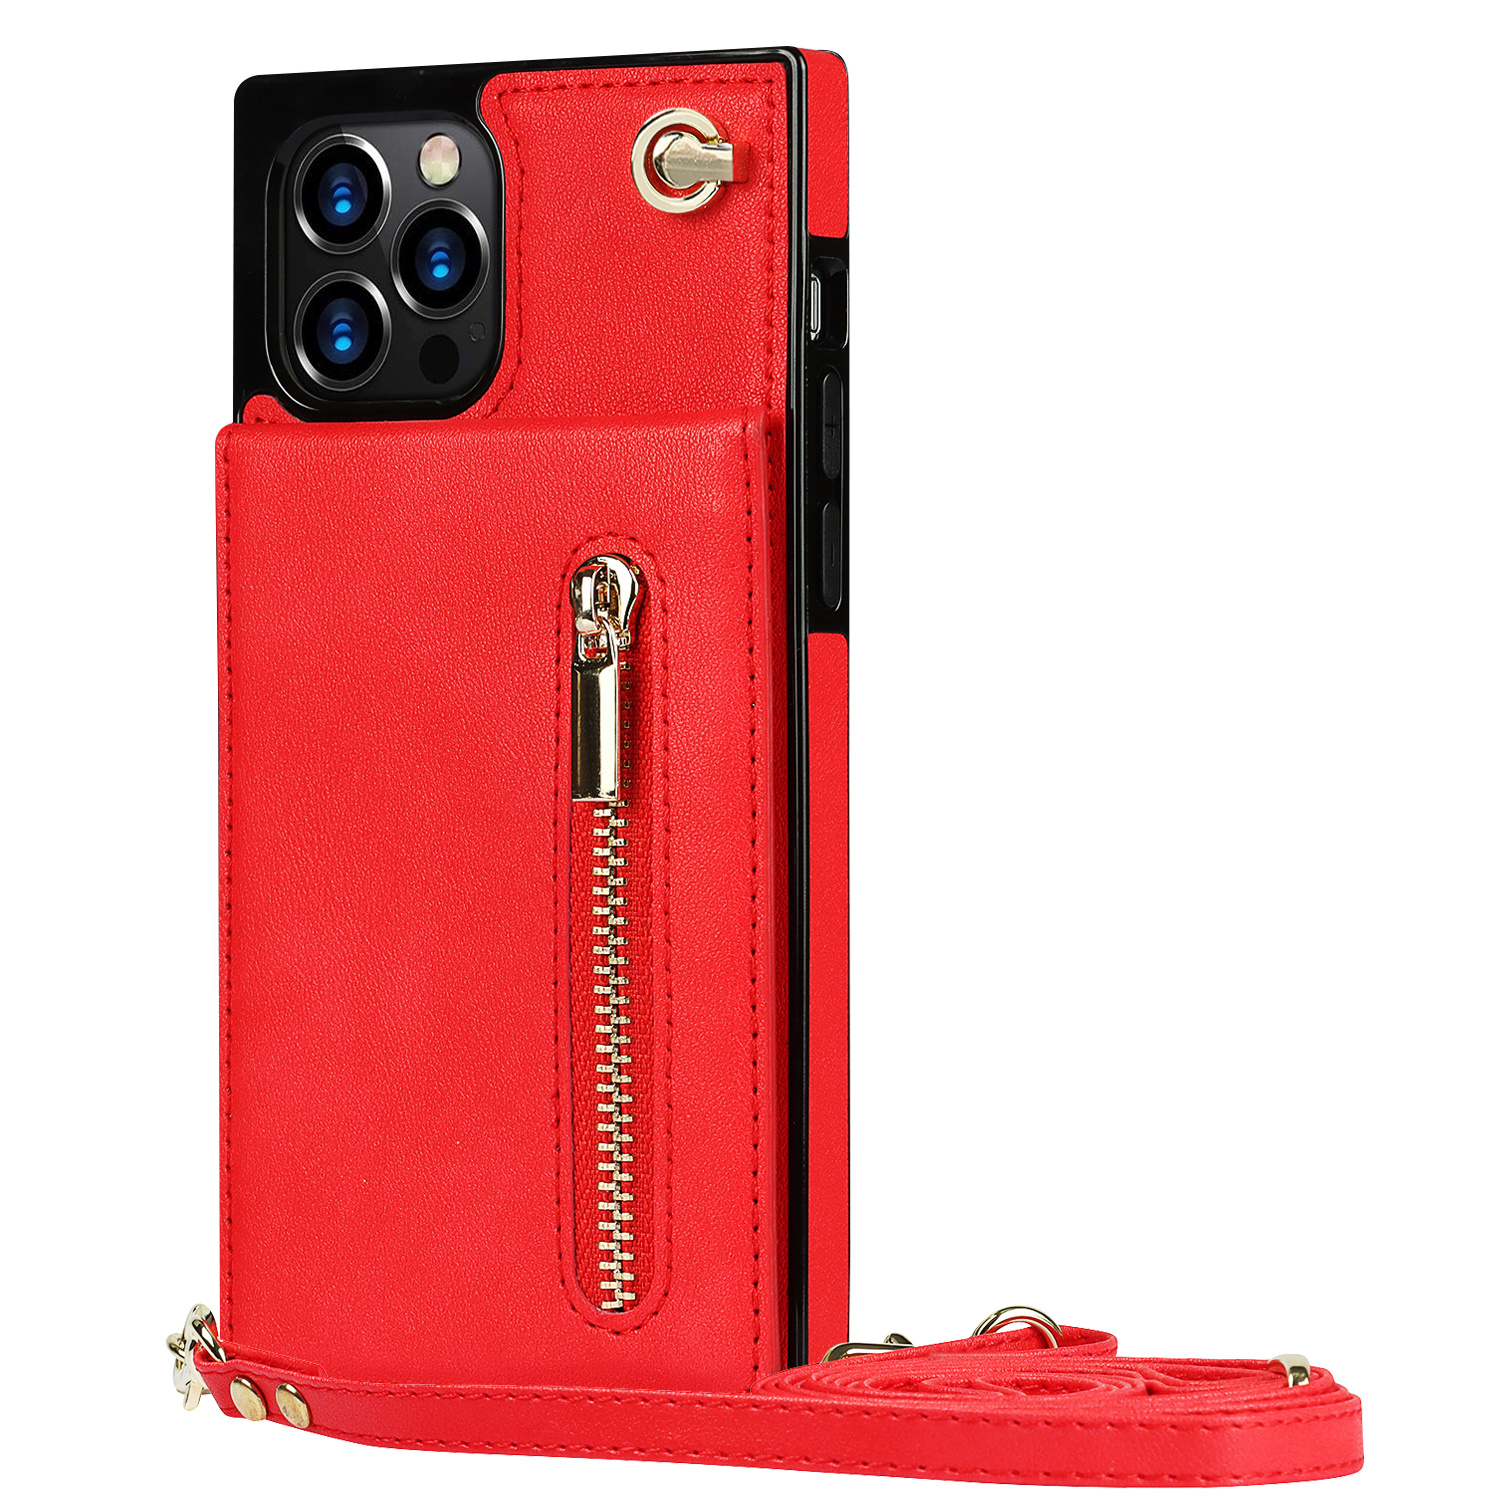 Samsung Galaxy S23 Plus Back Cover Hoesje met Koord - Pasjeshouder - PU Leer - Koord - Samsung Galaxy S23 Plus - Rood